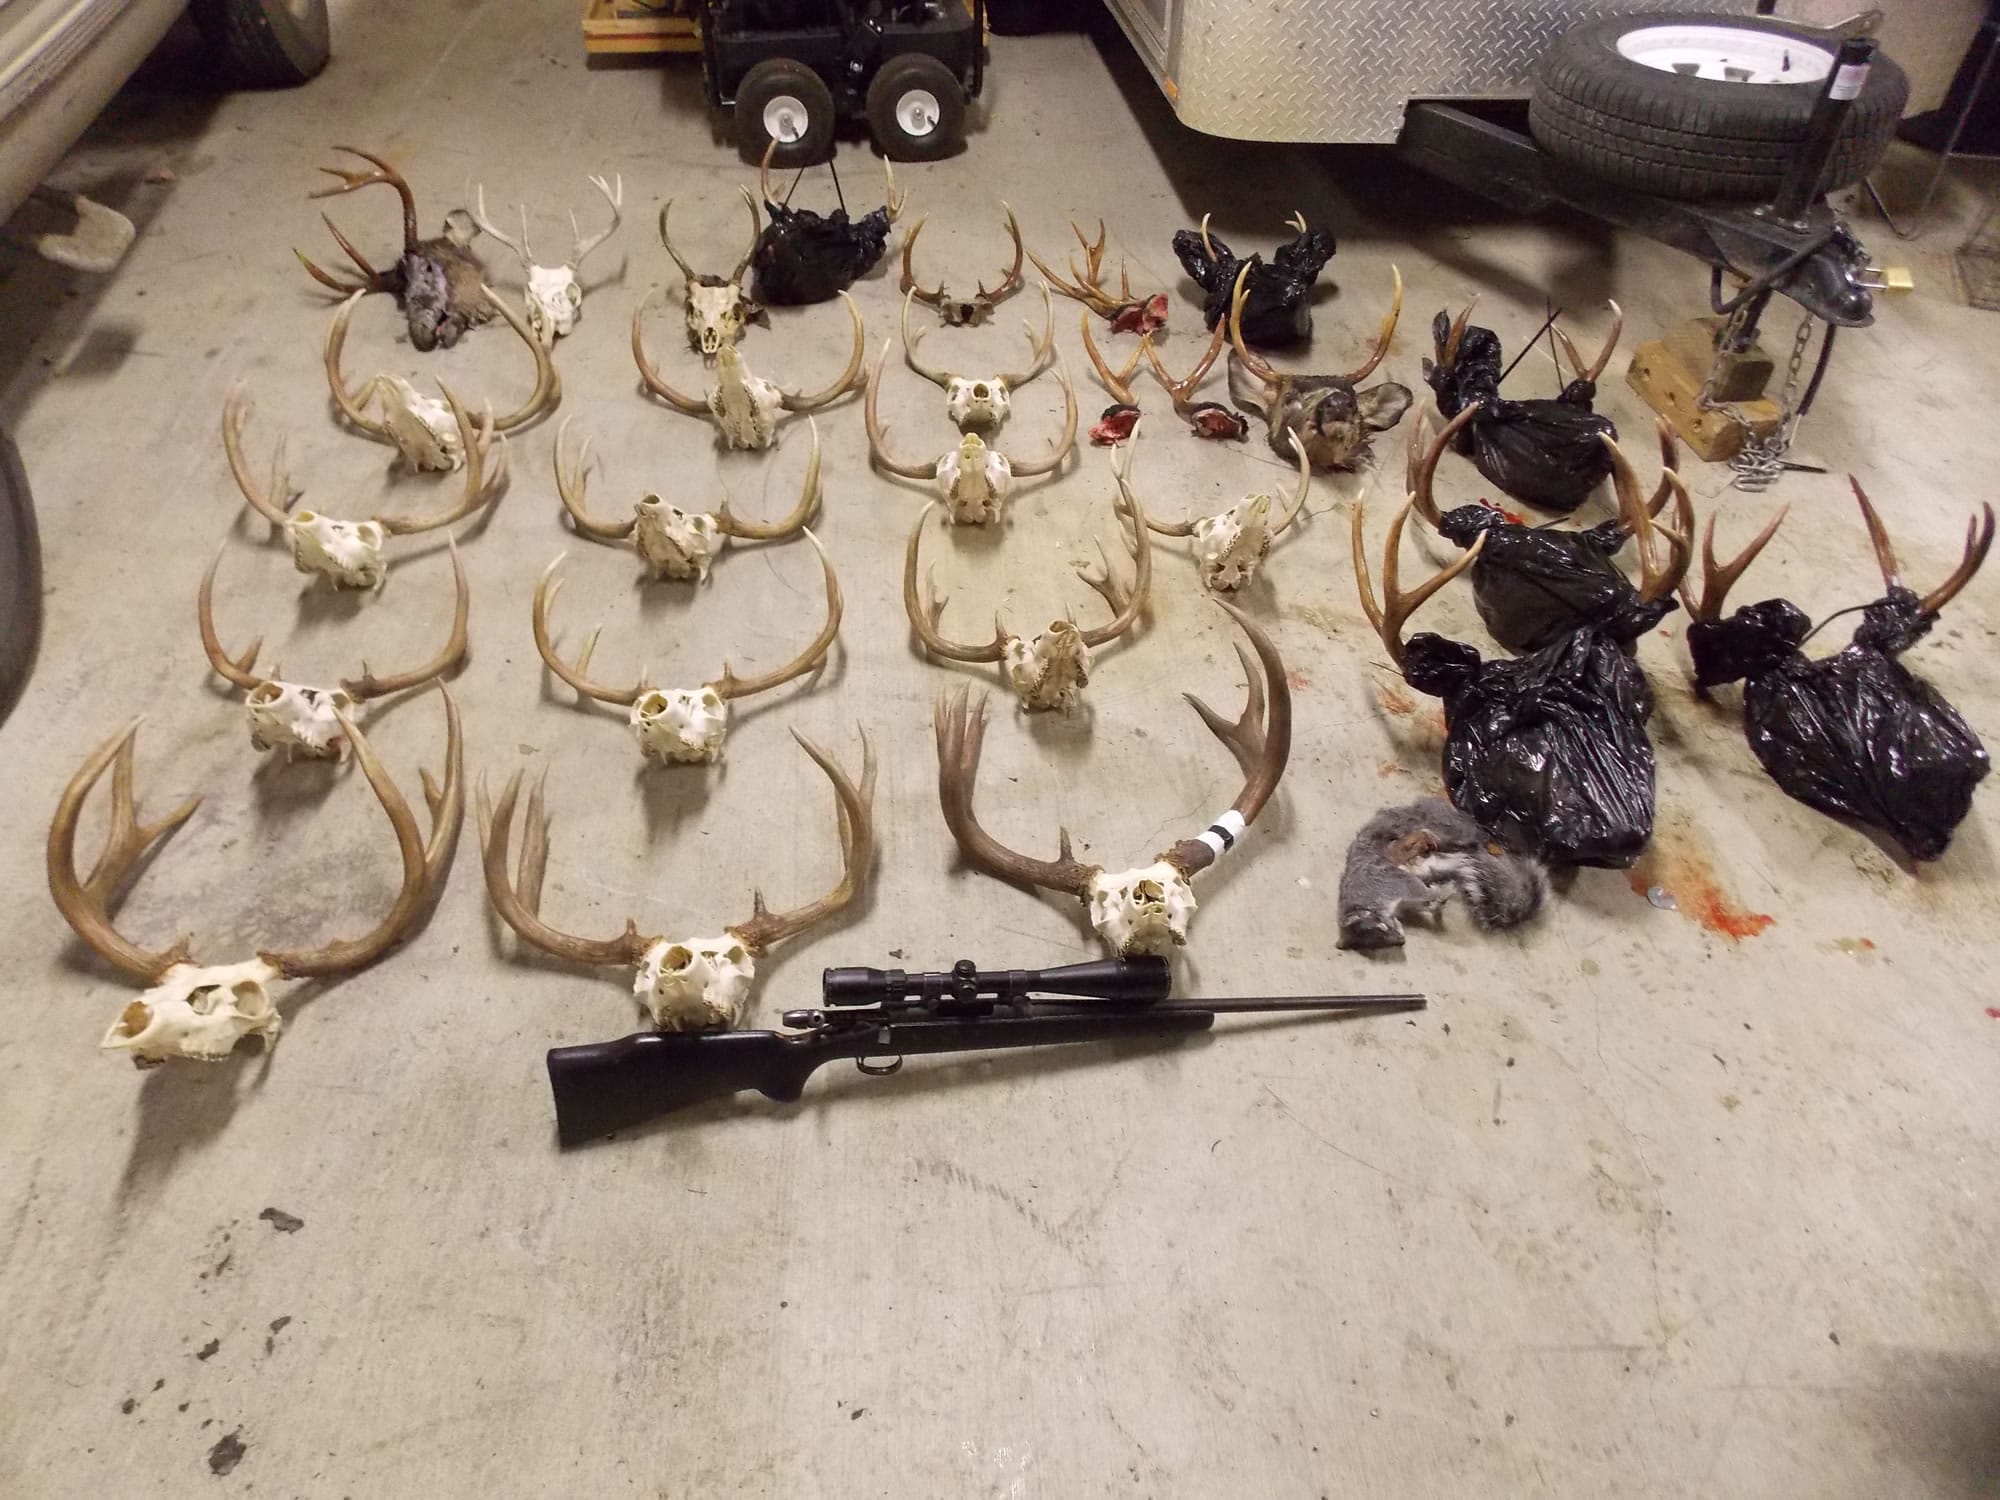 Officers found more than 25 deer and elk skulls when serving warrants in Cowlitz County.